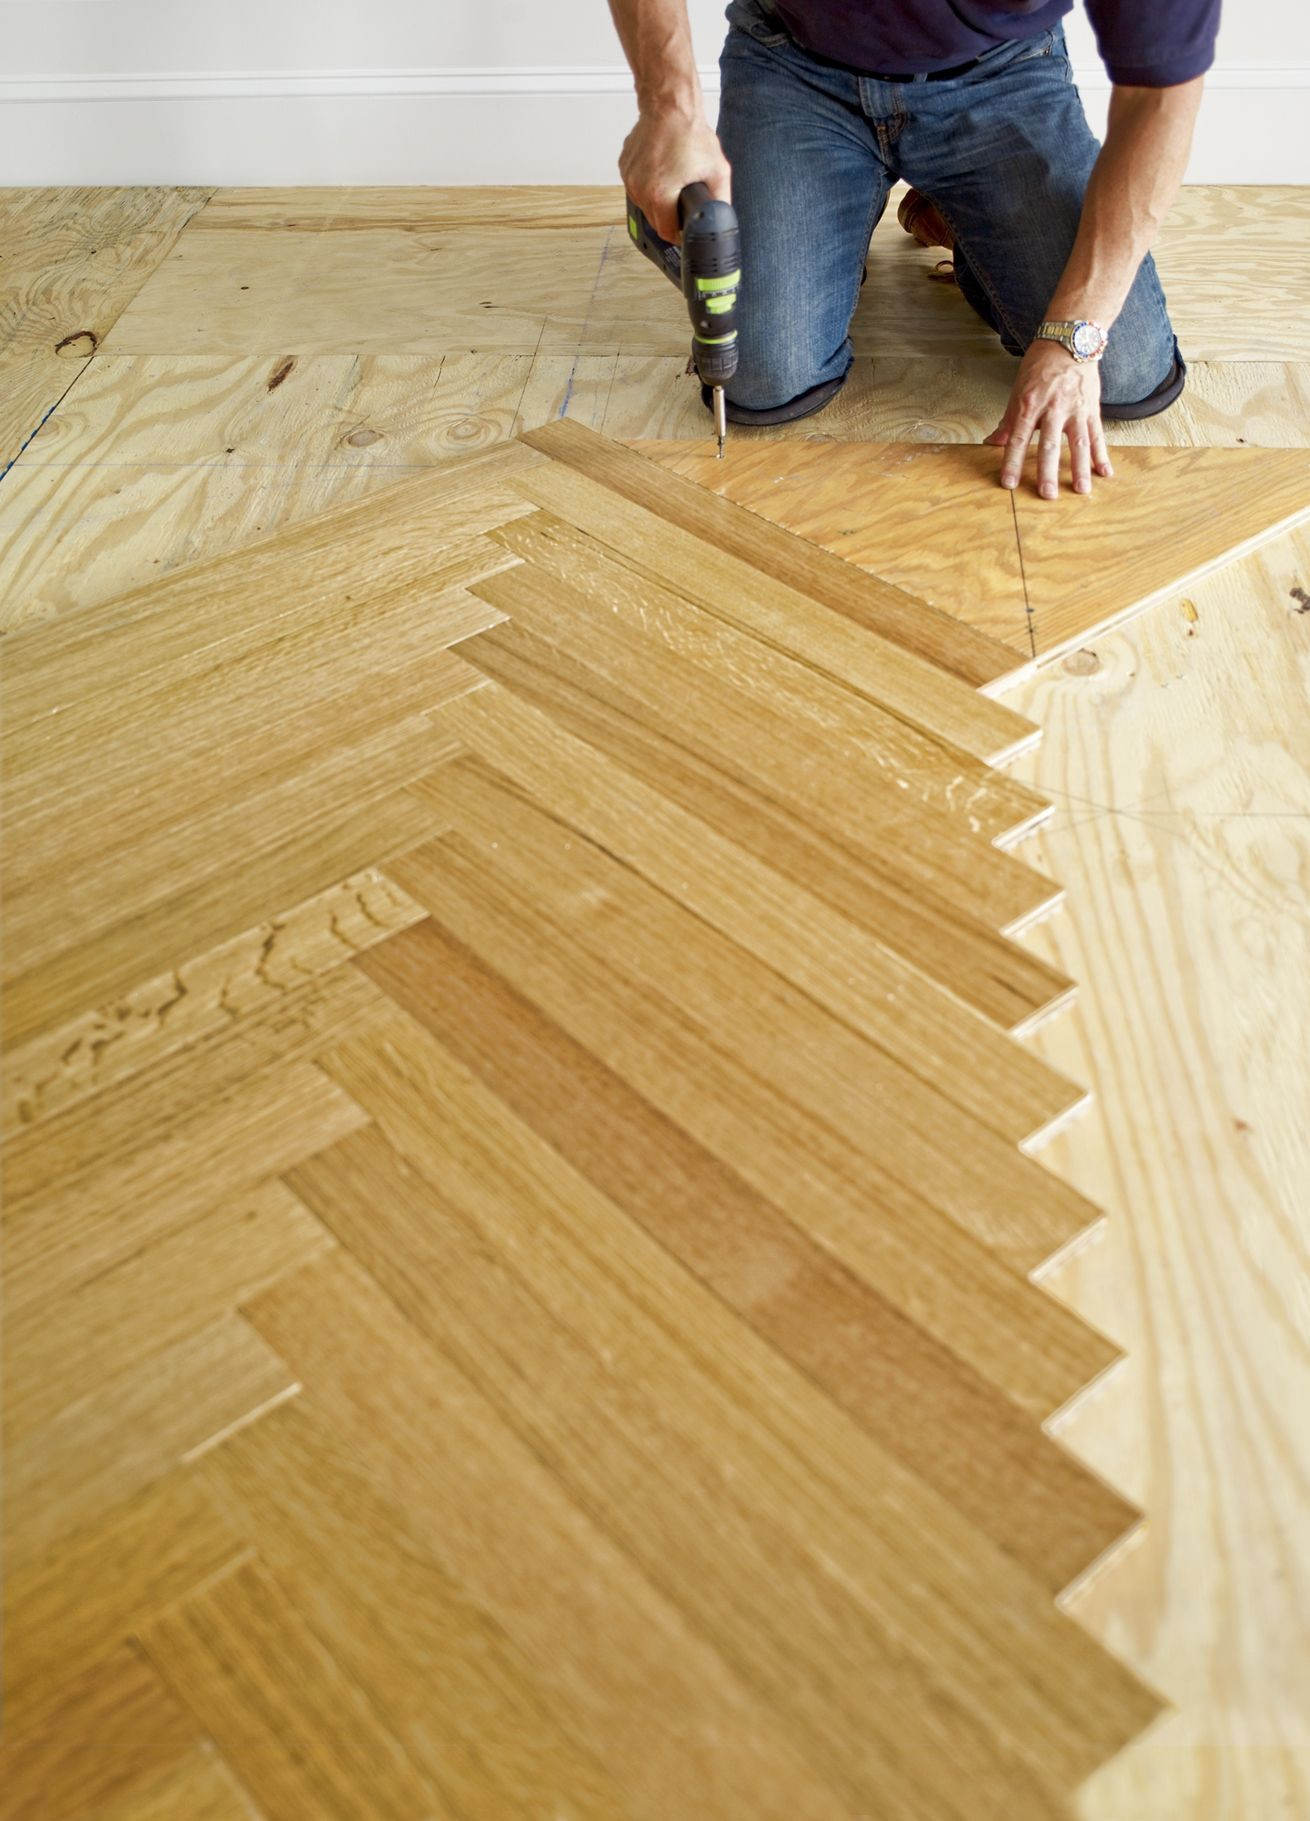 10 Cute How to Install Prefinished Hardwood Floors Yourself 2024 free download how to install prefinished hardwood floors yourself of sanding hardwood floors diy the pros and cons of prefinished throughout sanding hardwood floors diy how to install a herringbone floor 